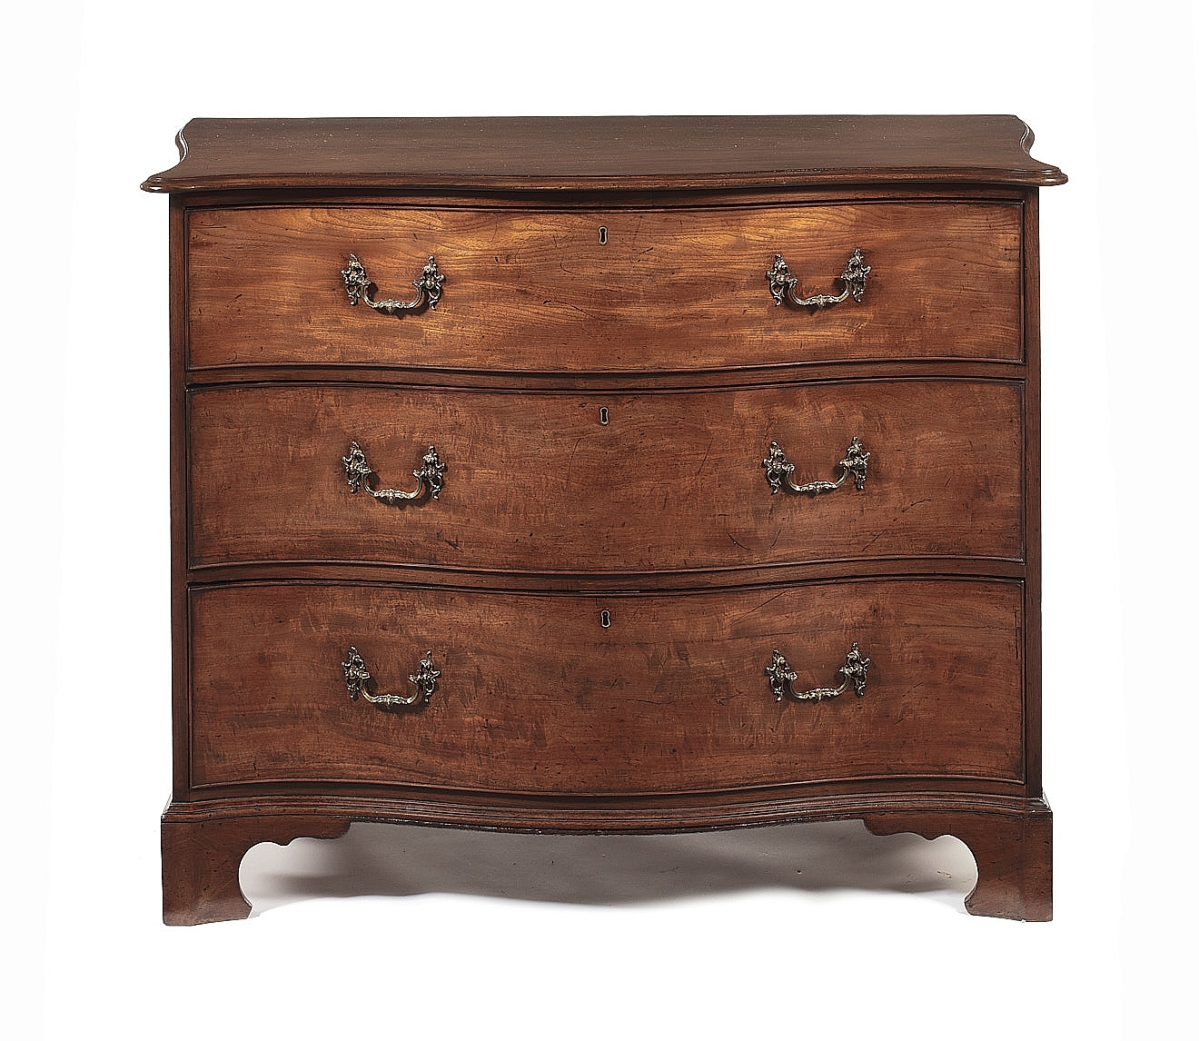 Thomas Chippendale is renowned for his sophisticated pieces, but simple and practical pieces were also a large part of his shop’s production. This George III mahogany serpentine chest was attributed to Chippendale based on similarities to documented pieces and led the sale, bringing $8,600 from a private collector in the UK who had never bid at The Pedestal before.